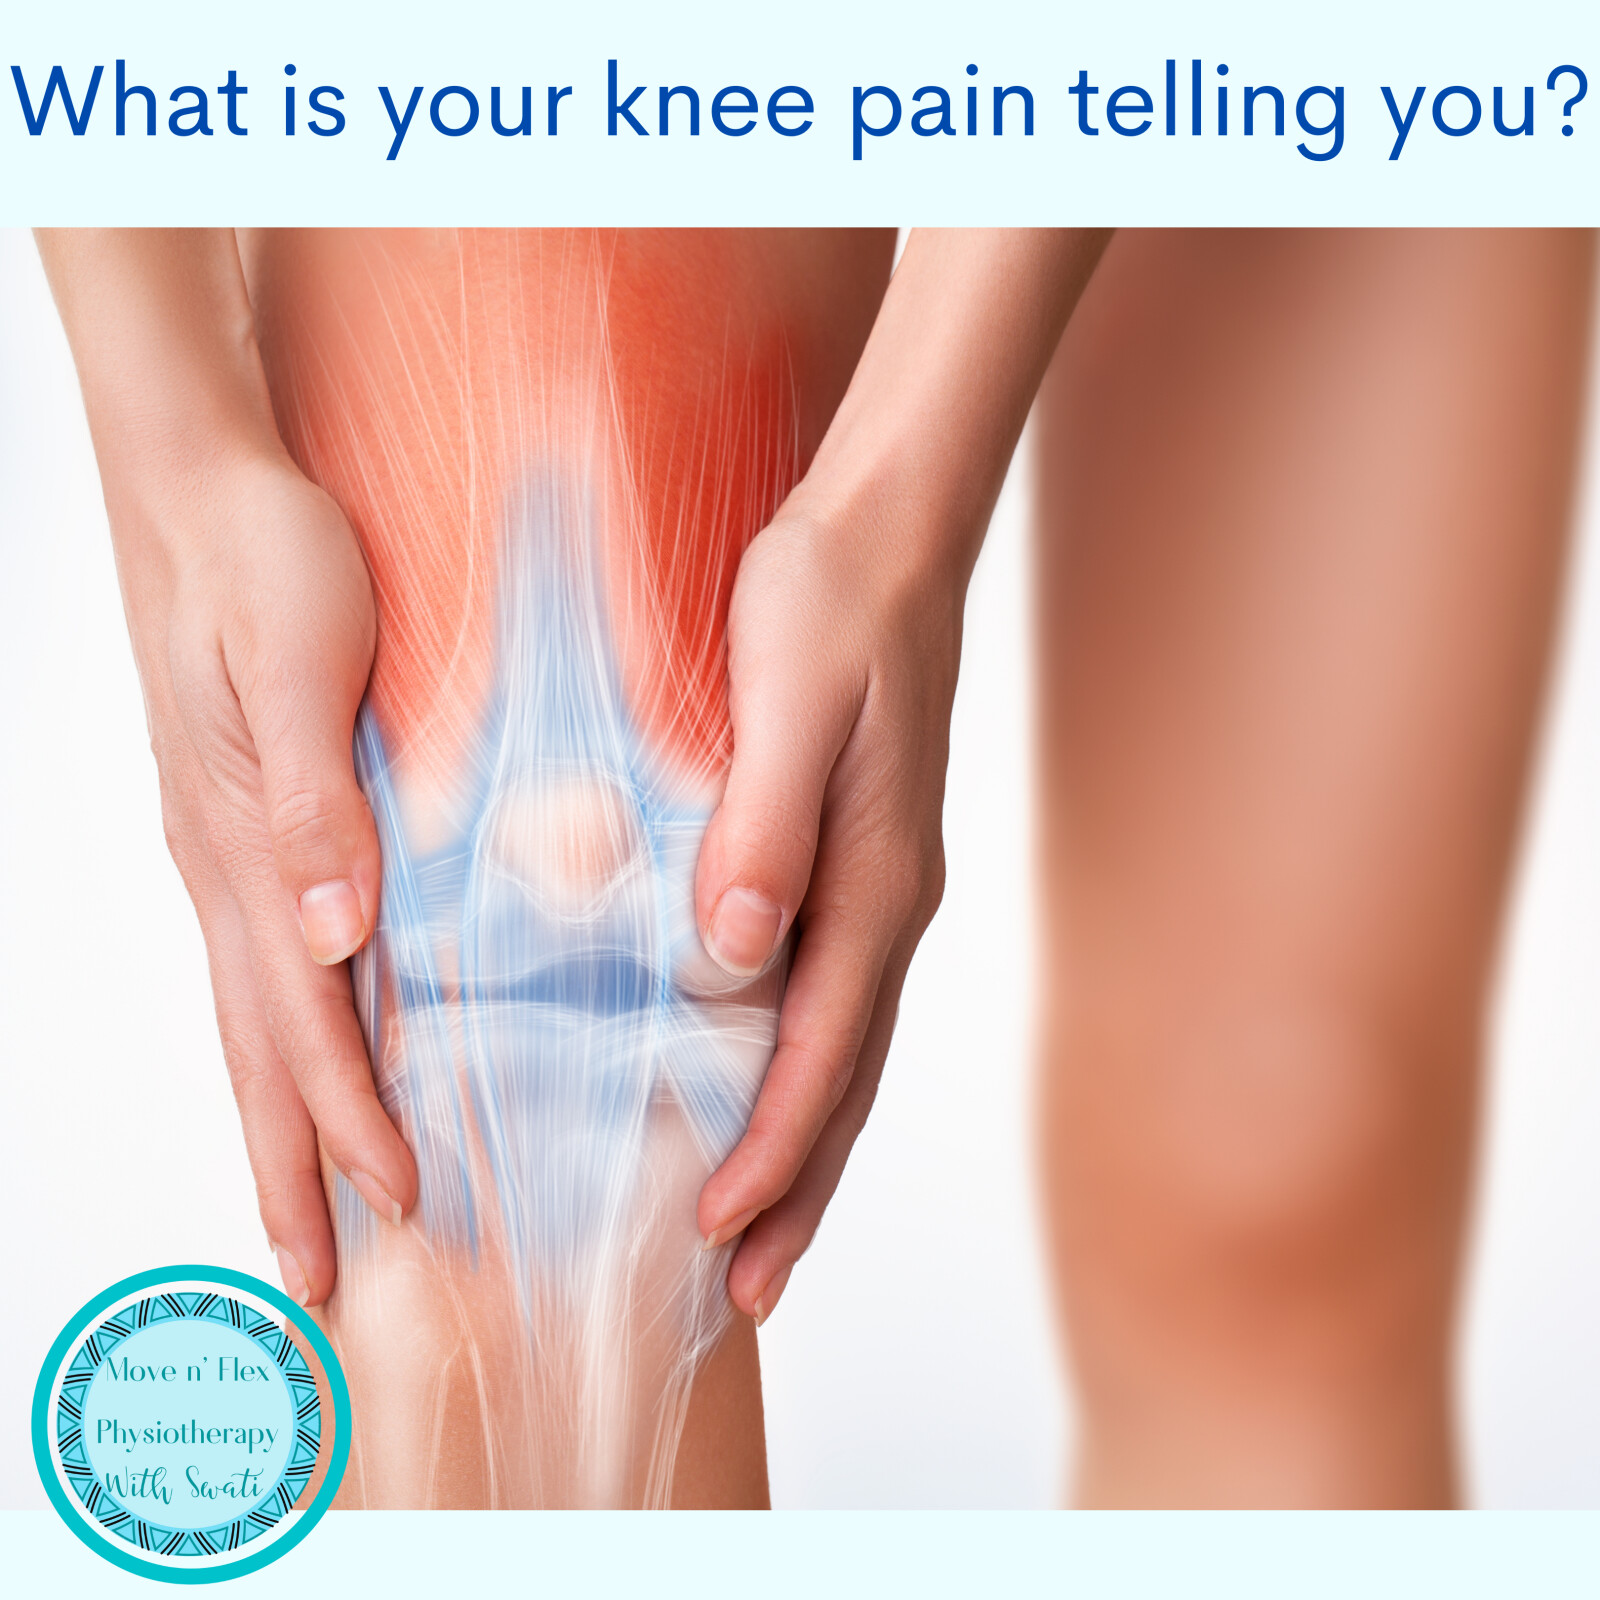 What is your knee pain telling you?